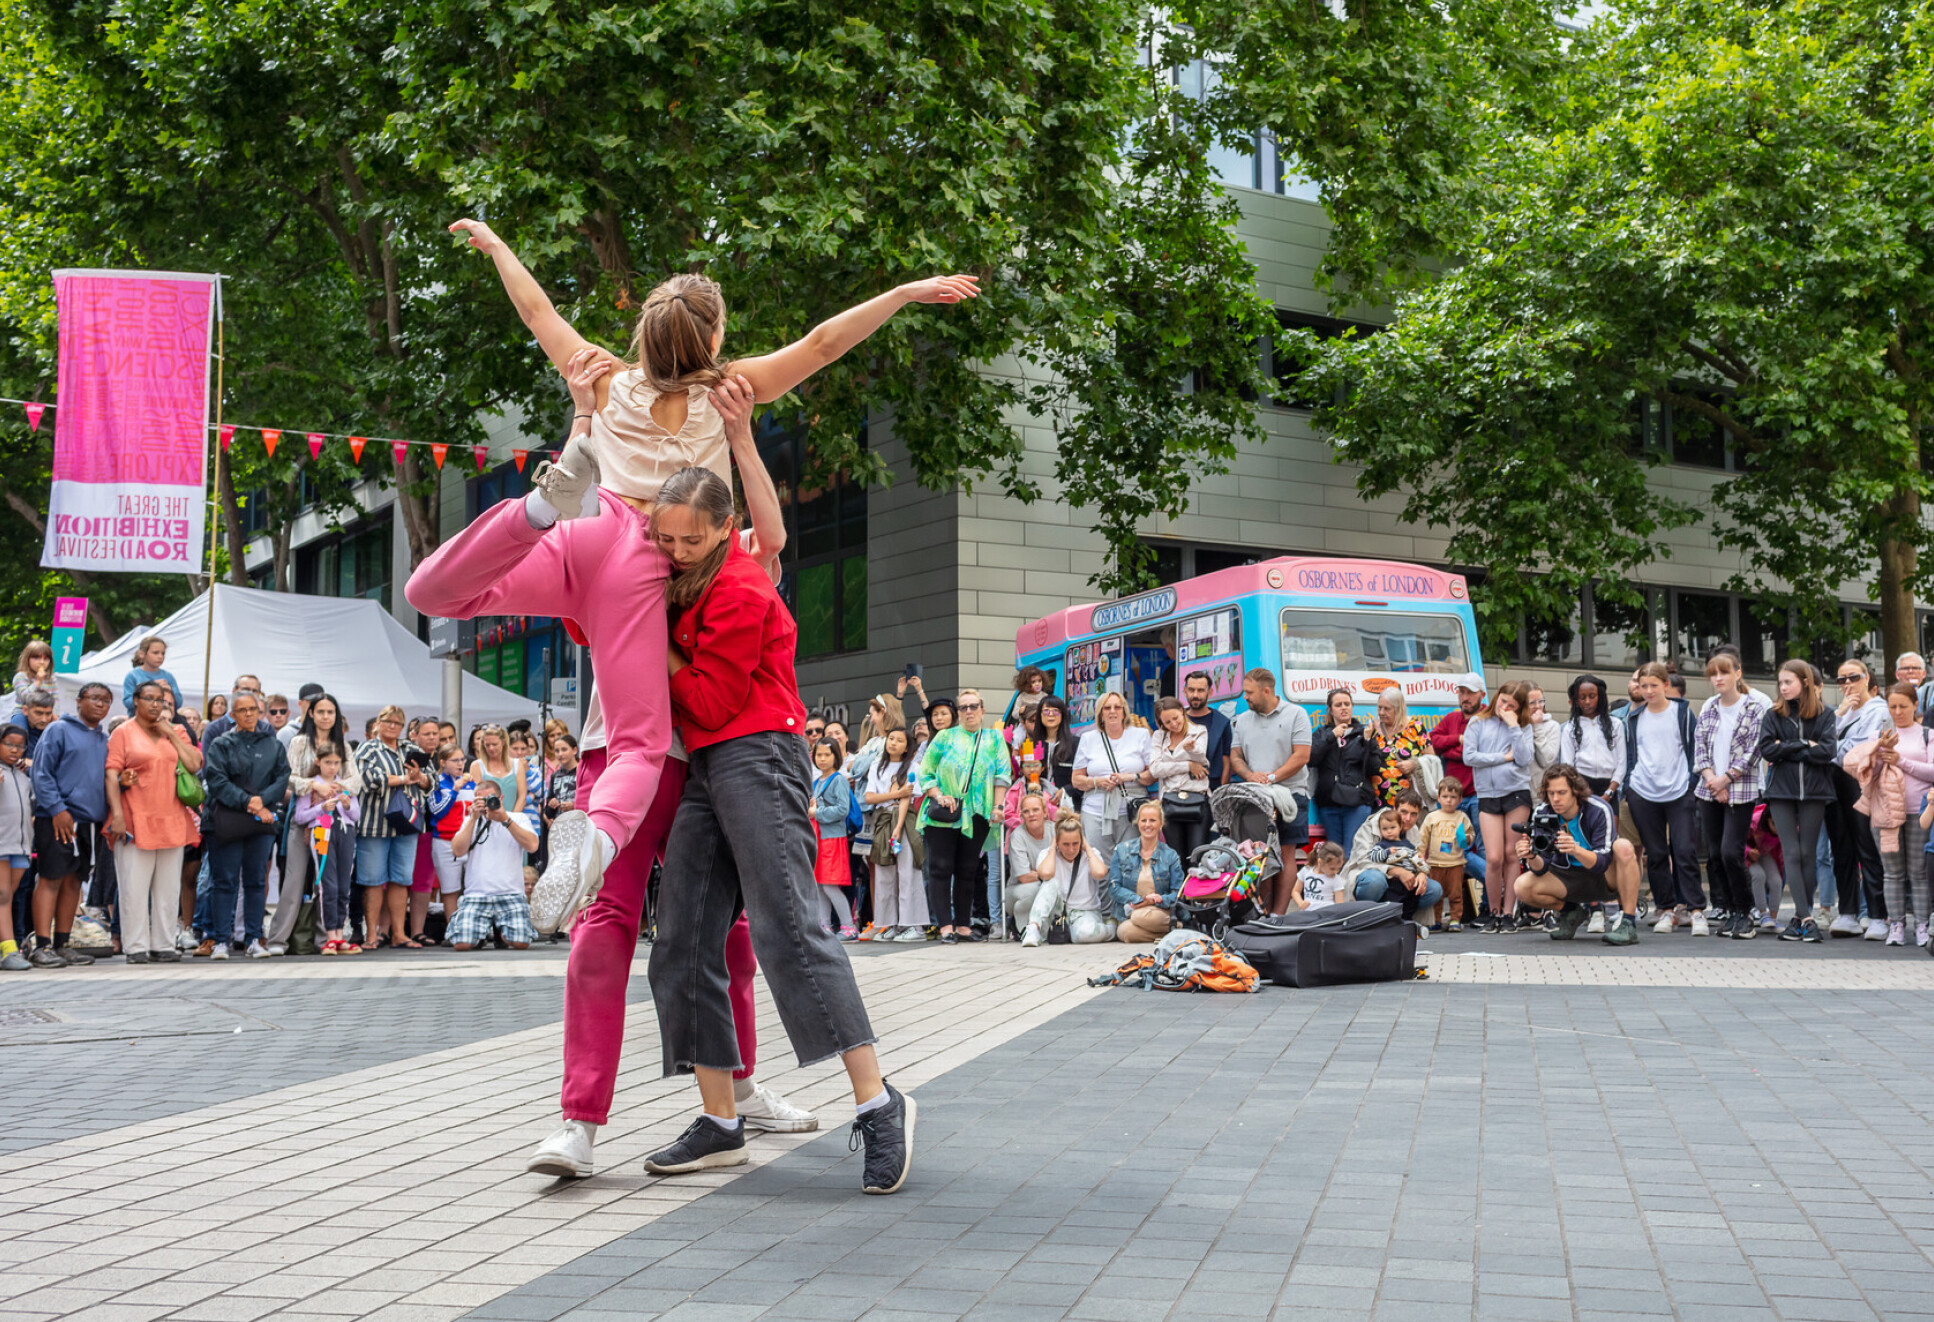 Two dancers performing on the street for a crowd at the Great Exhibition Road Festival